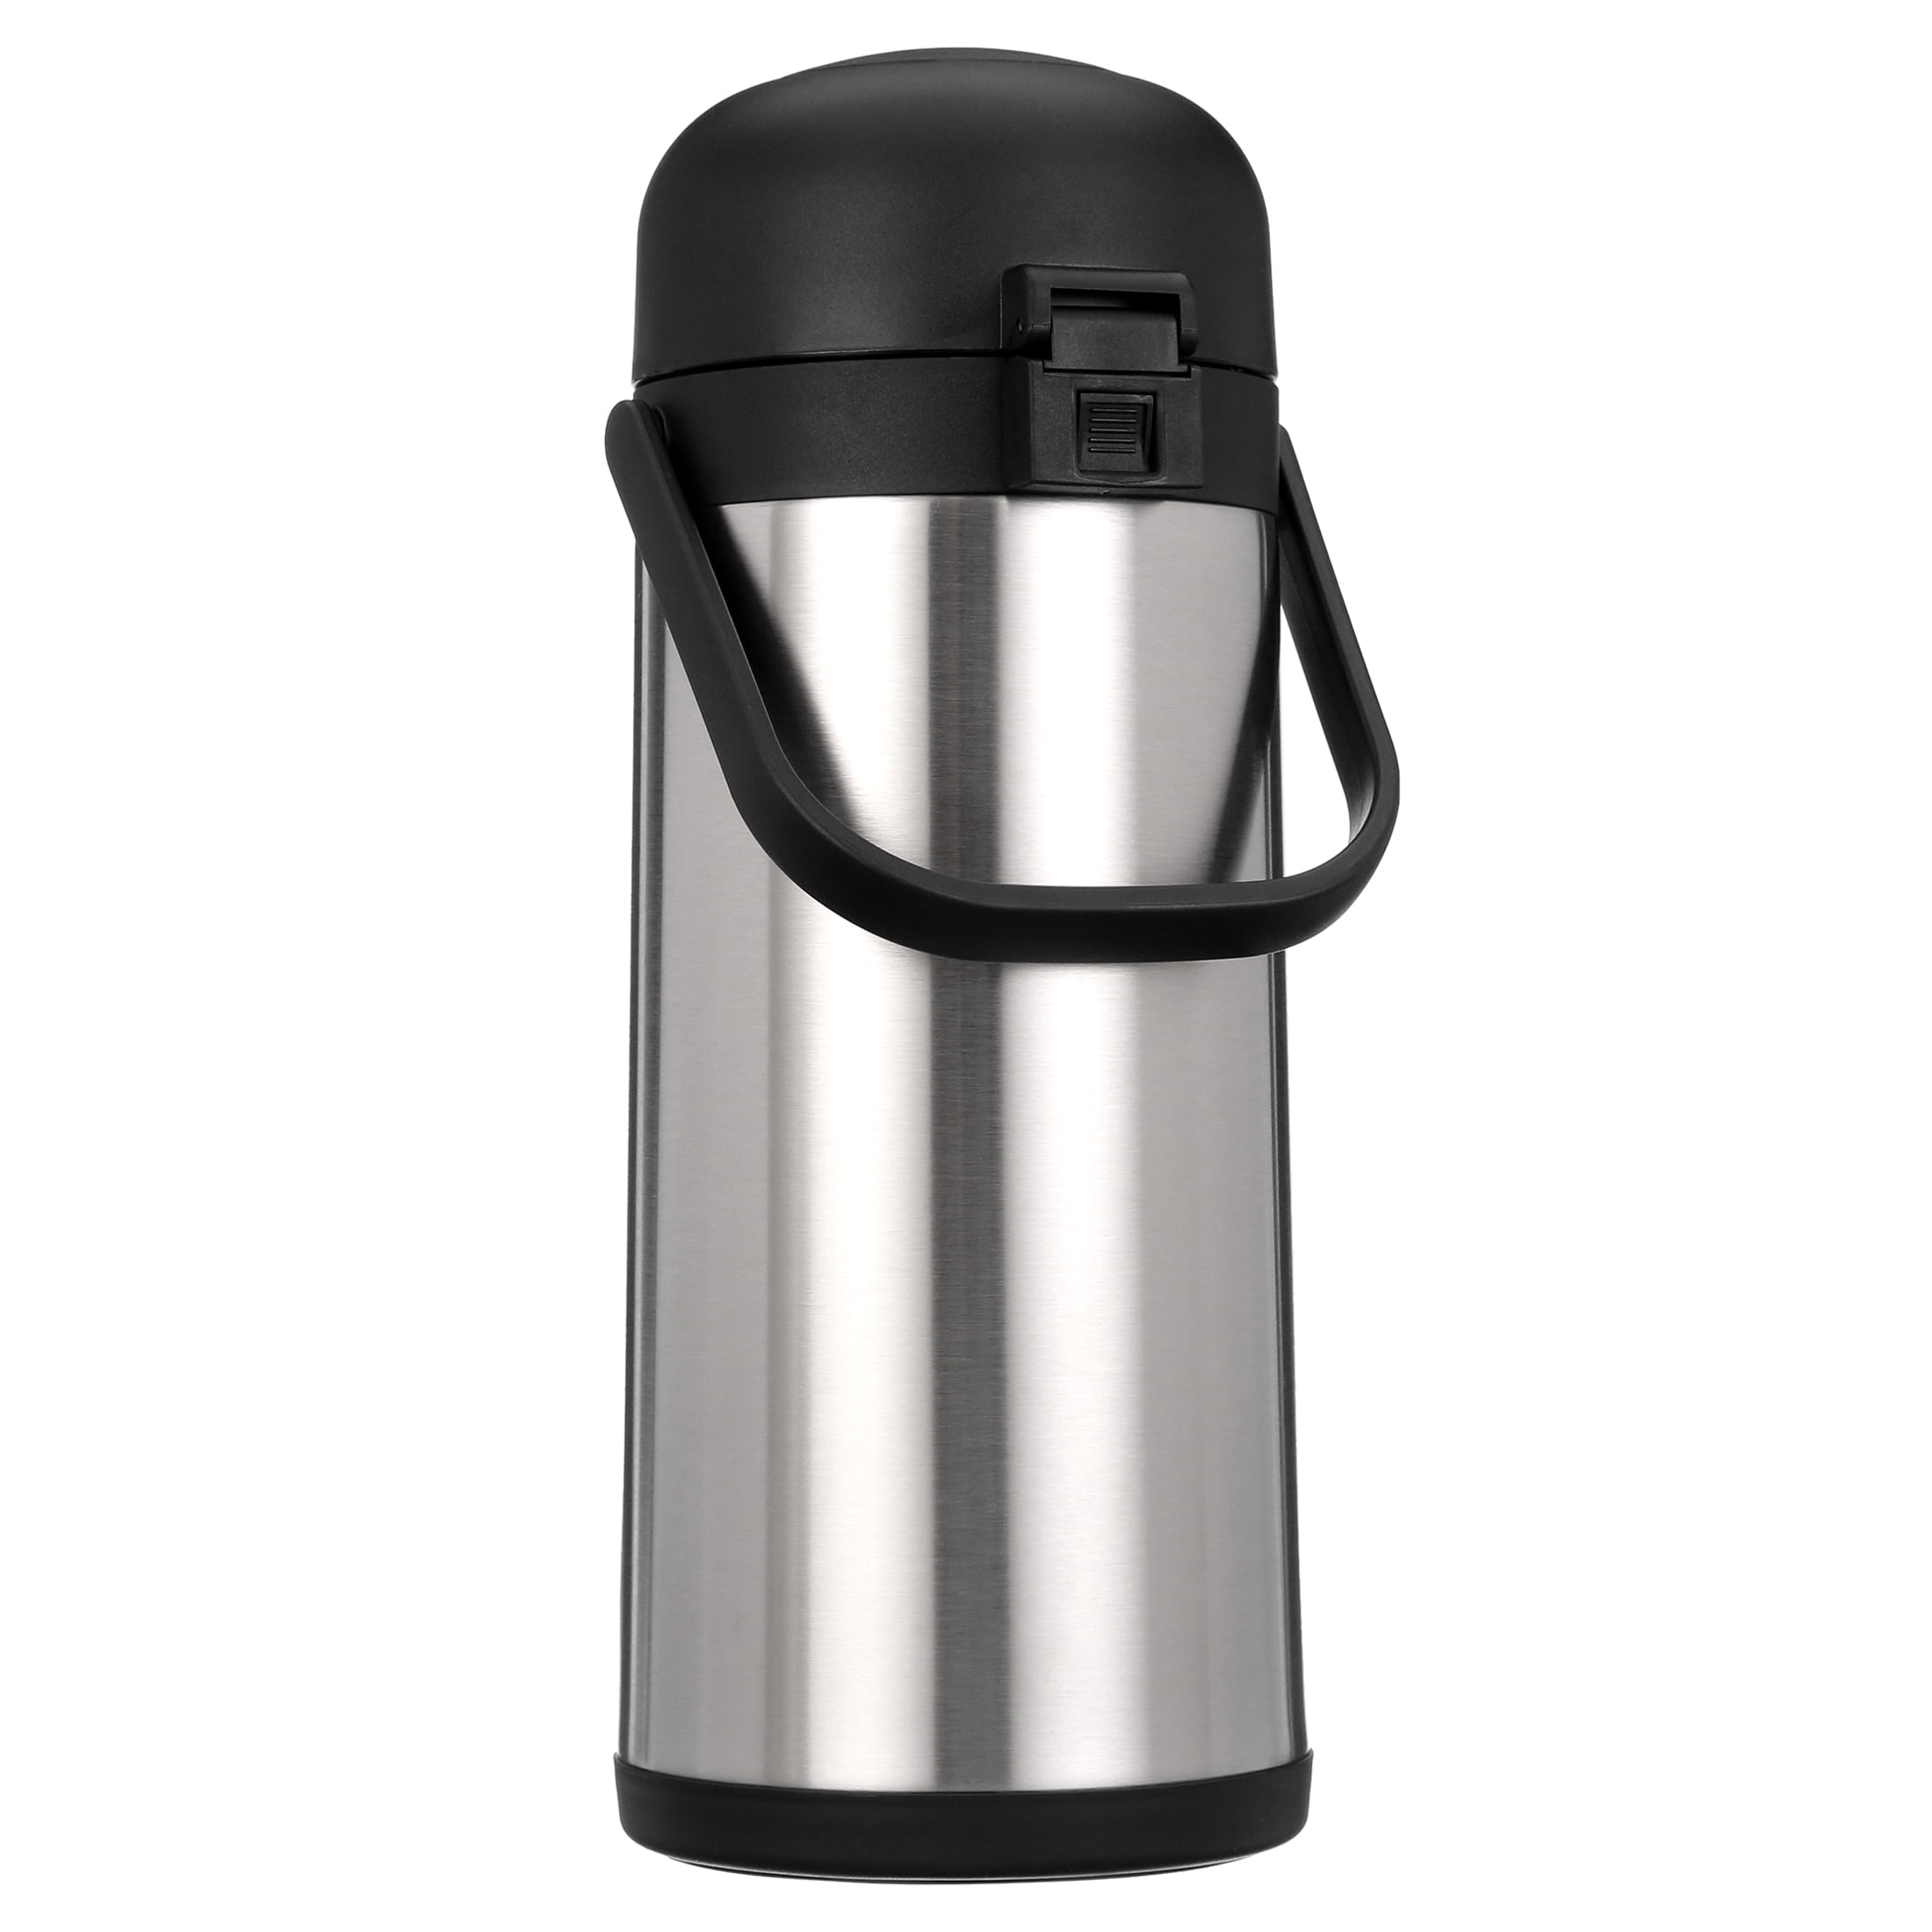 TOMAKEIT SS-W030 Airpot Coffee Carafe Thermal 3L(102 Oz) Insulated